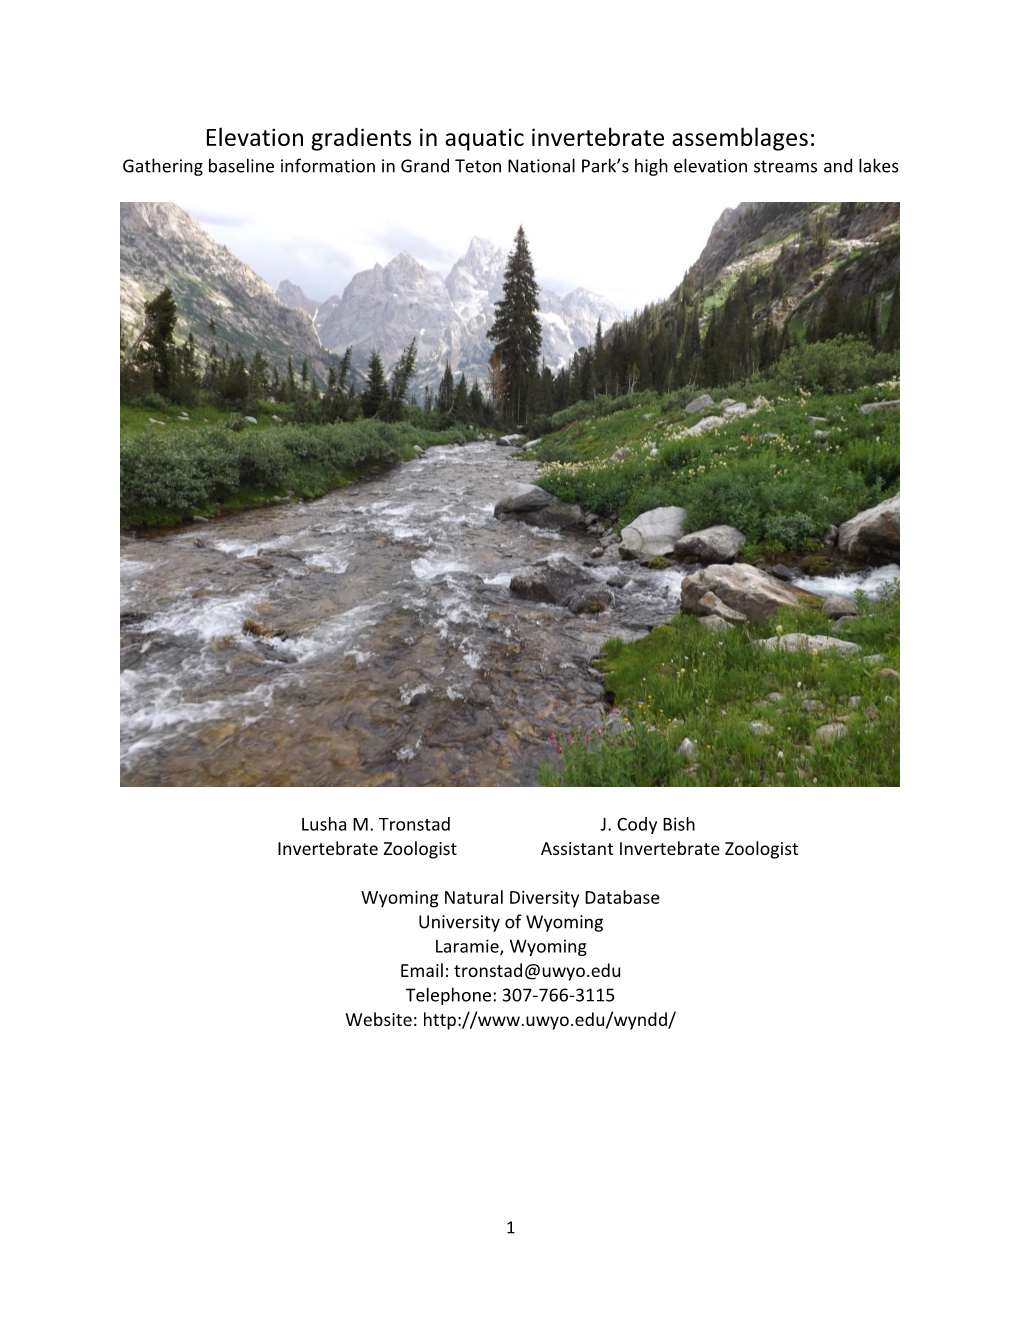 Elevation Gradients in Aquatic Invertebrate Assemblages: Gathering Baseline Information in Grand Teton National Park’S High Elevation Streams and Lakes